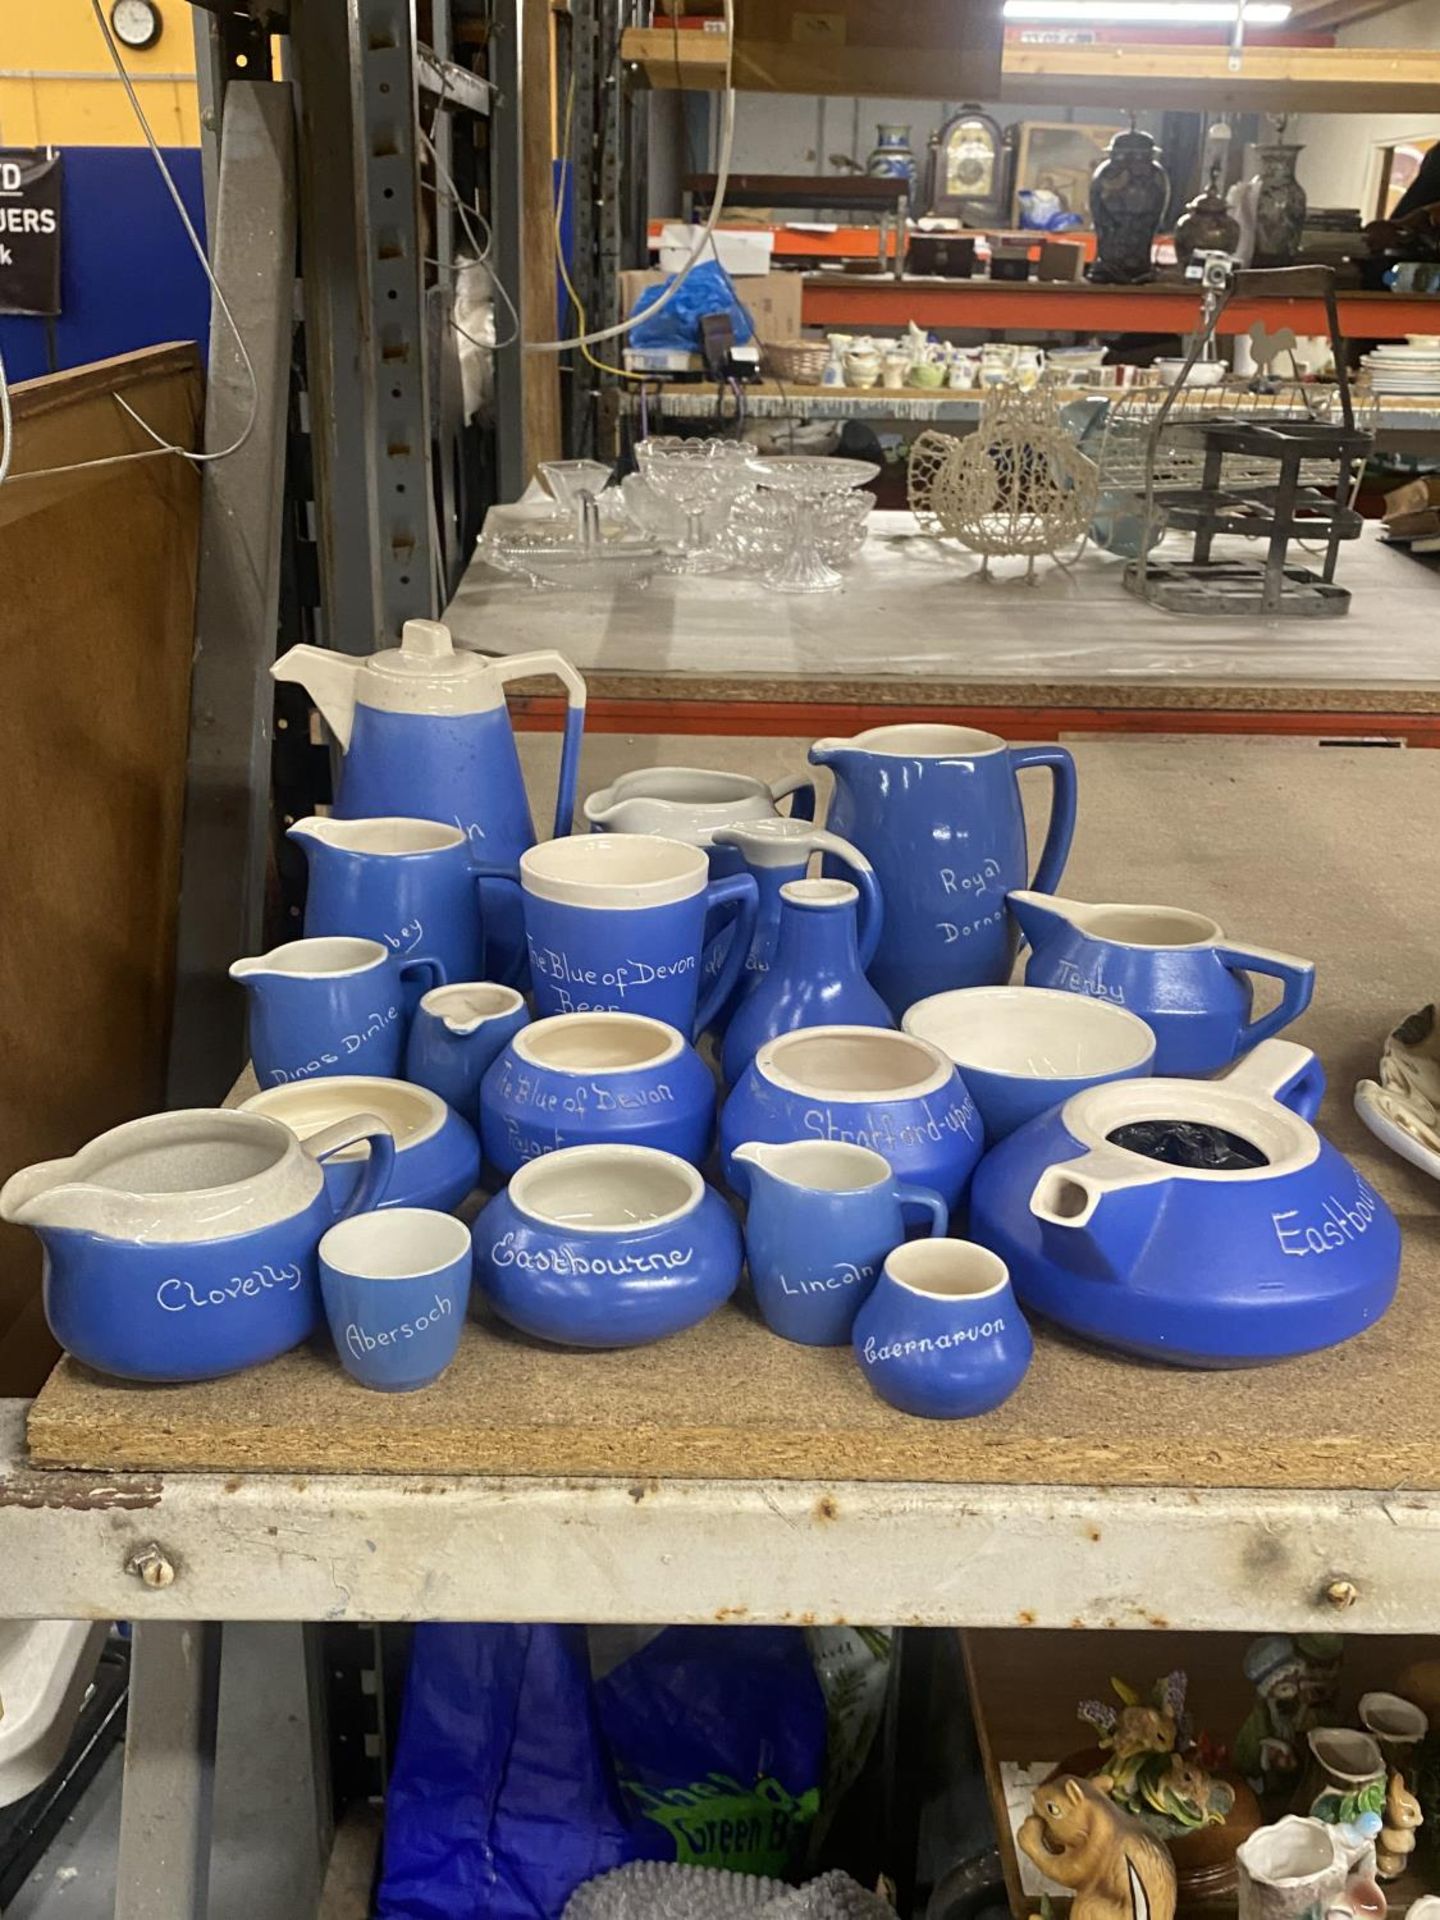 A COLLECTION OF BLUE AND CREAM 'TORQUAY WARE' TO INCLUDE JUGS, BOWLS, EGG CUPS, ETC